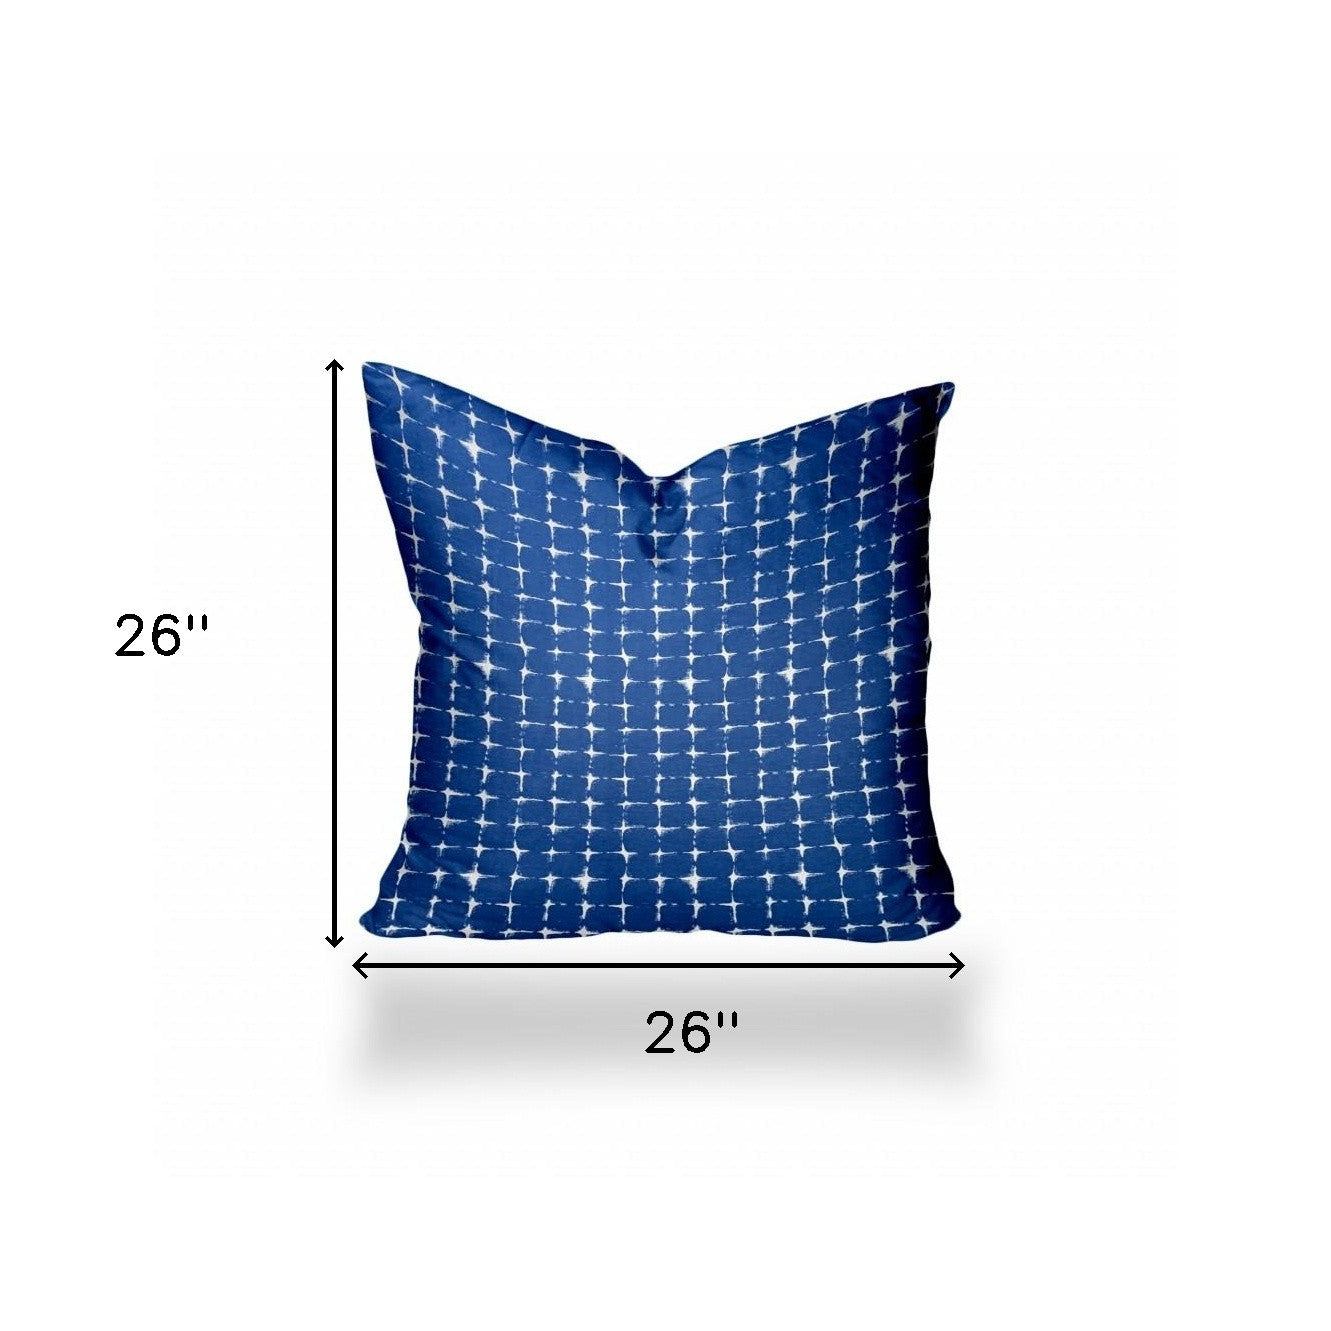 26" X 26" Blue And White Enveloped Gingham Throw Indoor Outdoor Pillow